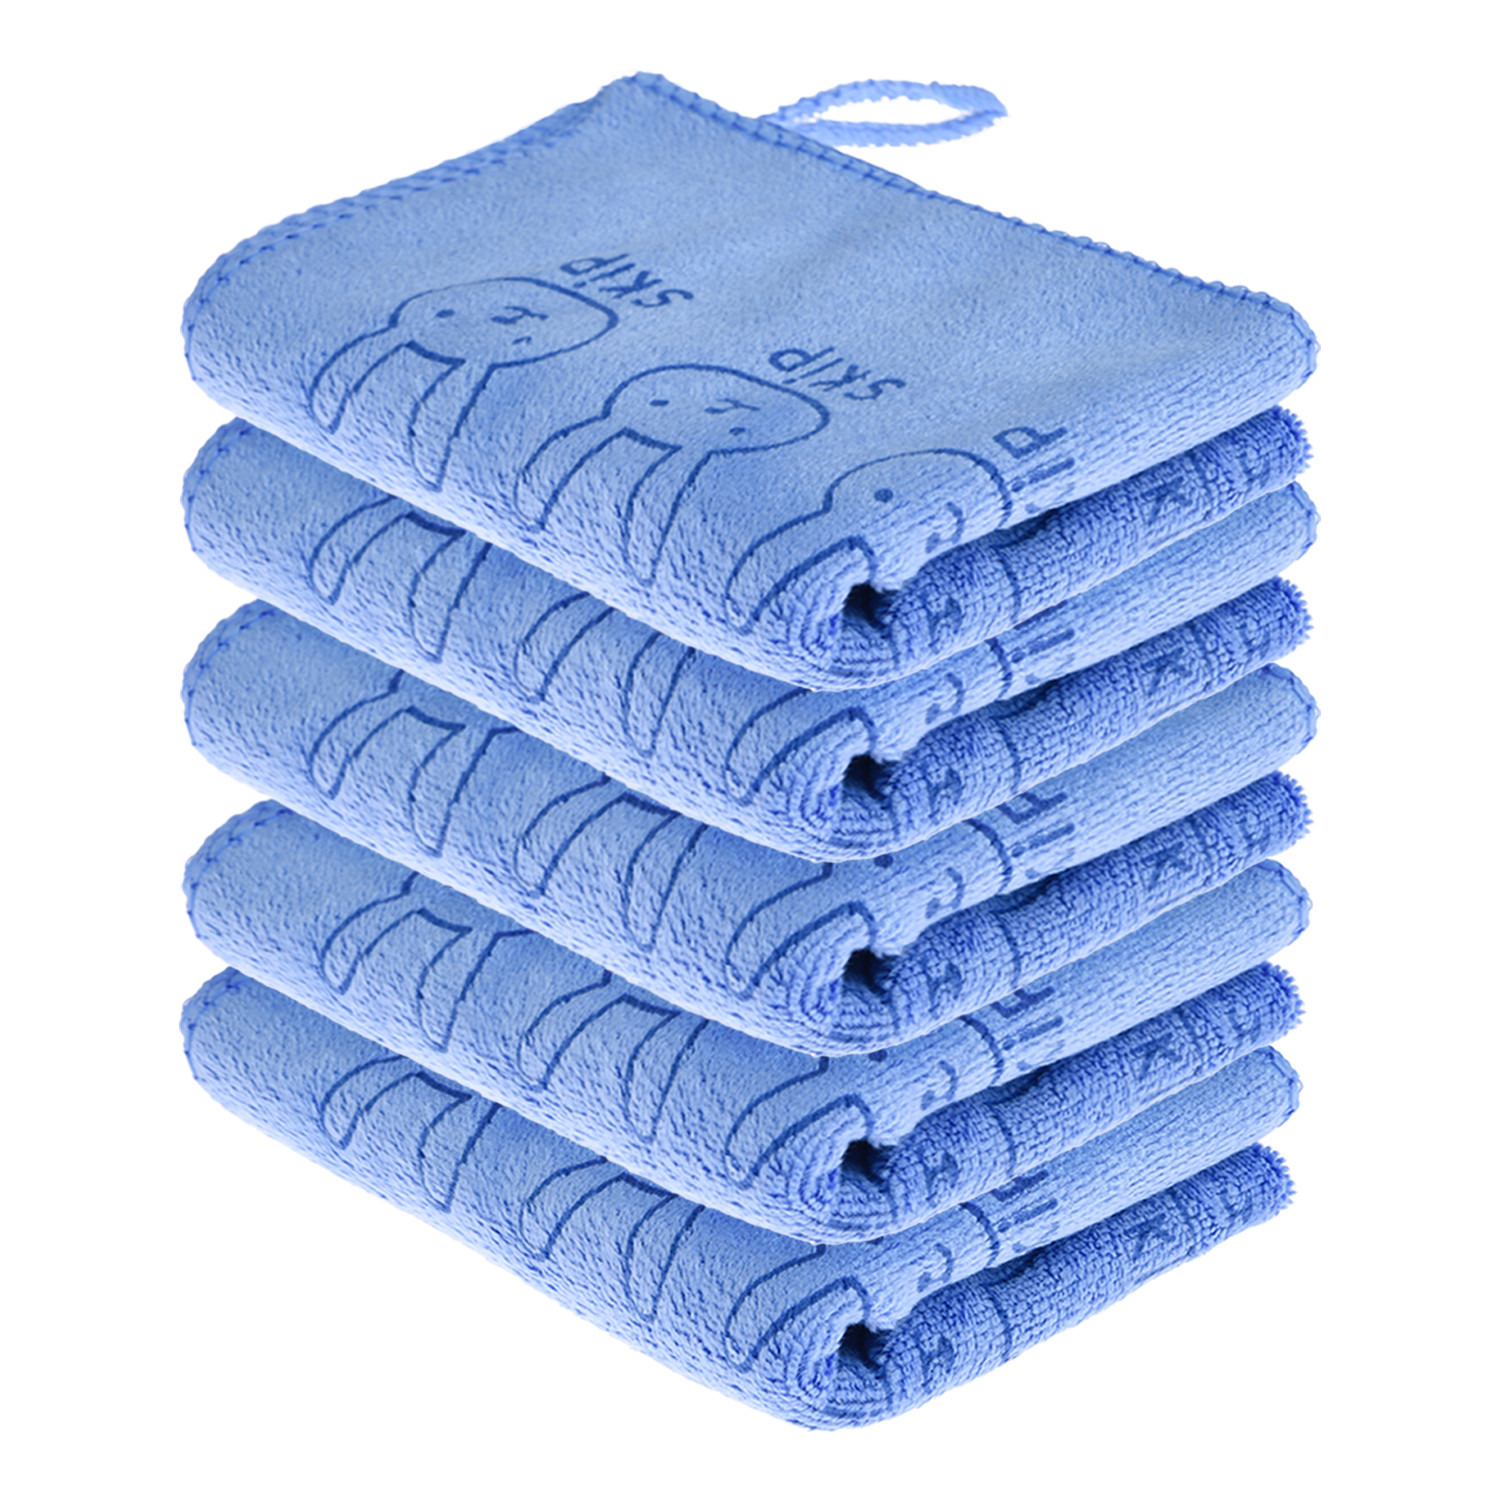 Kuber Industries Cleaning Towel | Reusable Cleaning Towel for Baby | Duster Towel for Home Cleaning | Skip Cleaning Cloth Towel with Hanging Loop | 30x40 | Pack of 2 | Blue